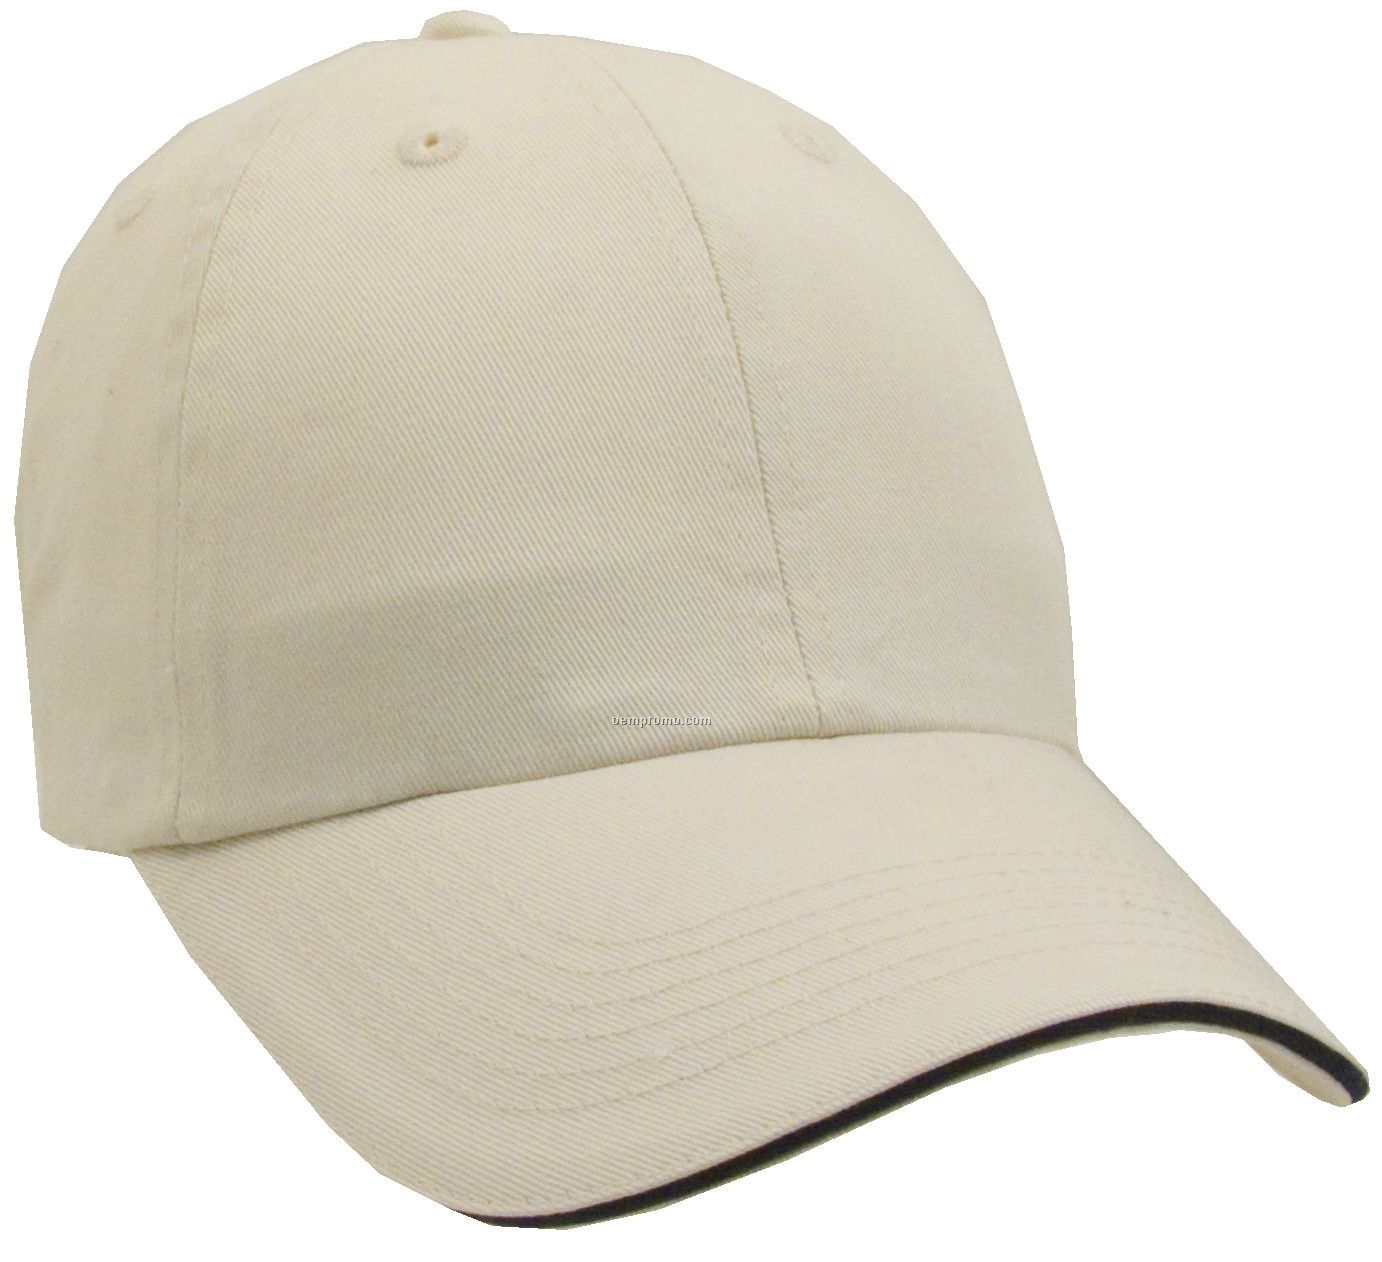 Unconstructed Chino Washed Cotton Twill Sandwich Cap (Blank)